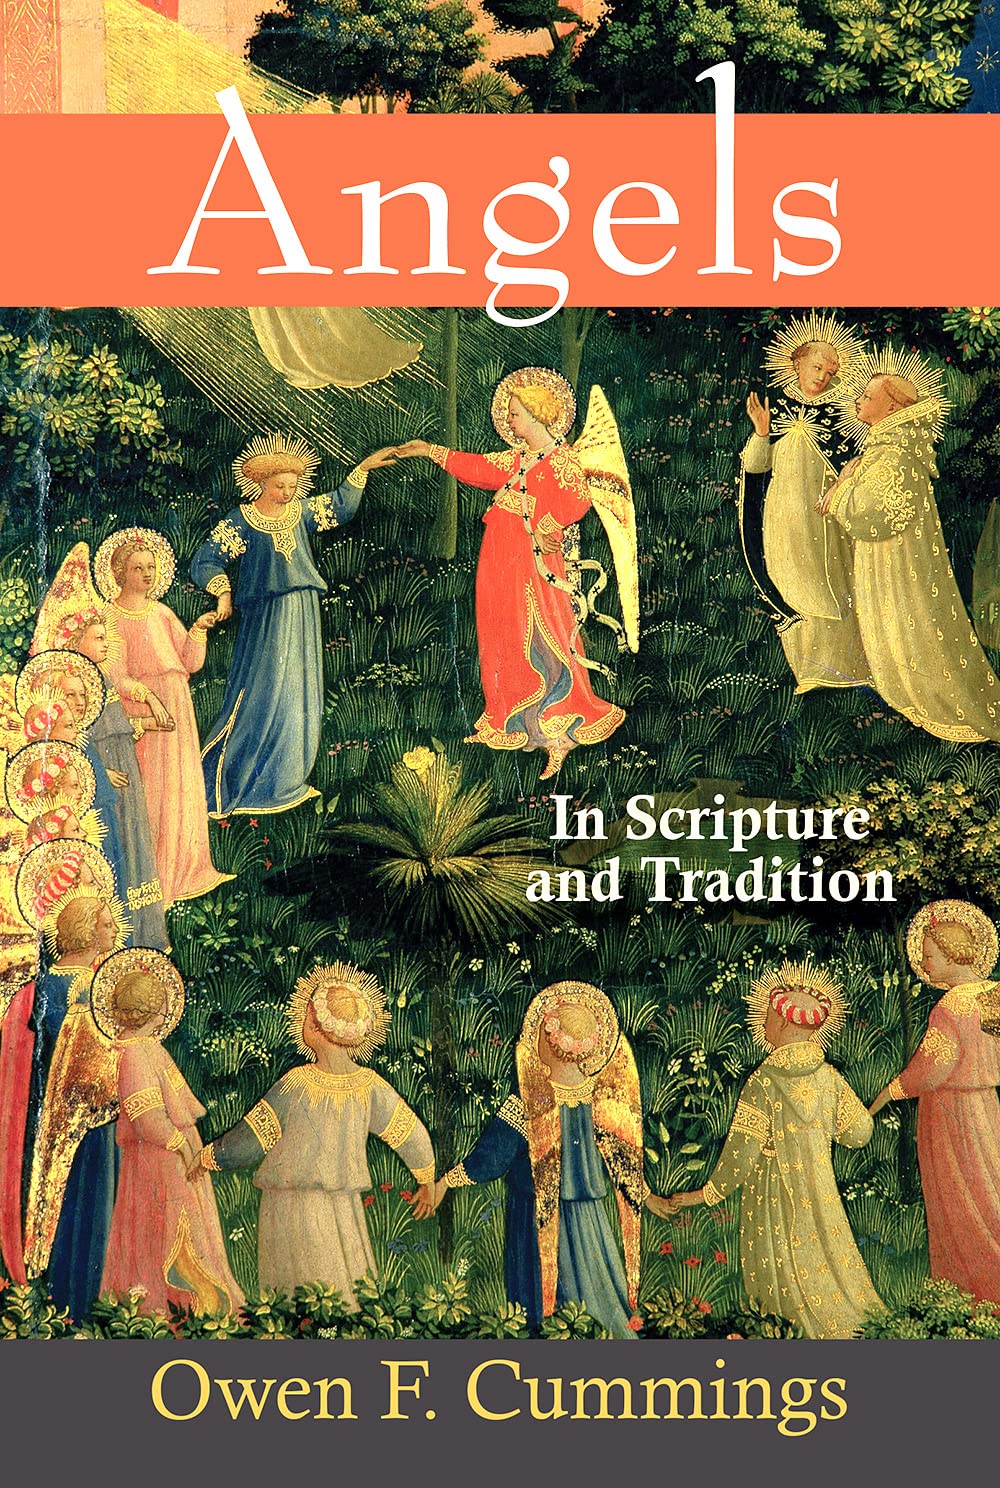 angels in Scripture and tradition